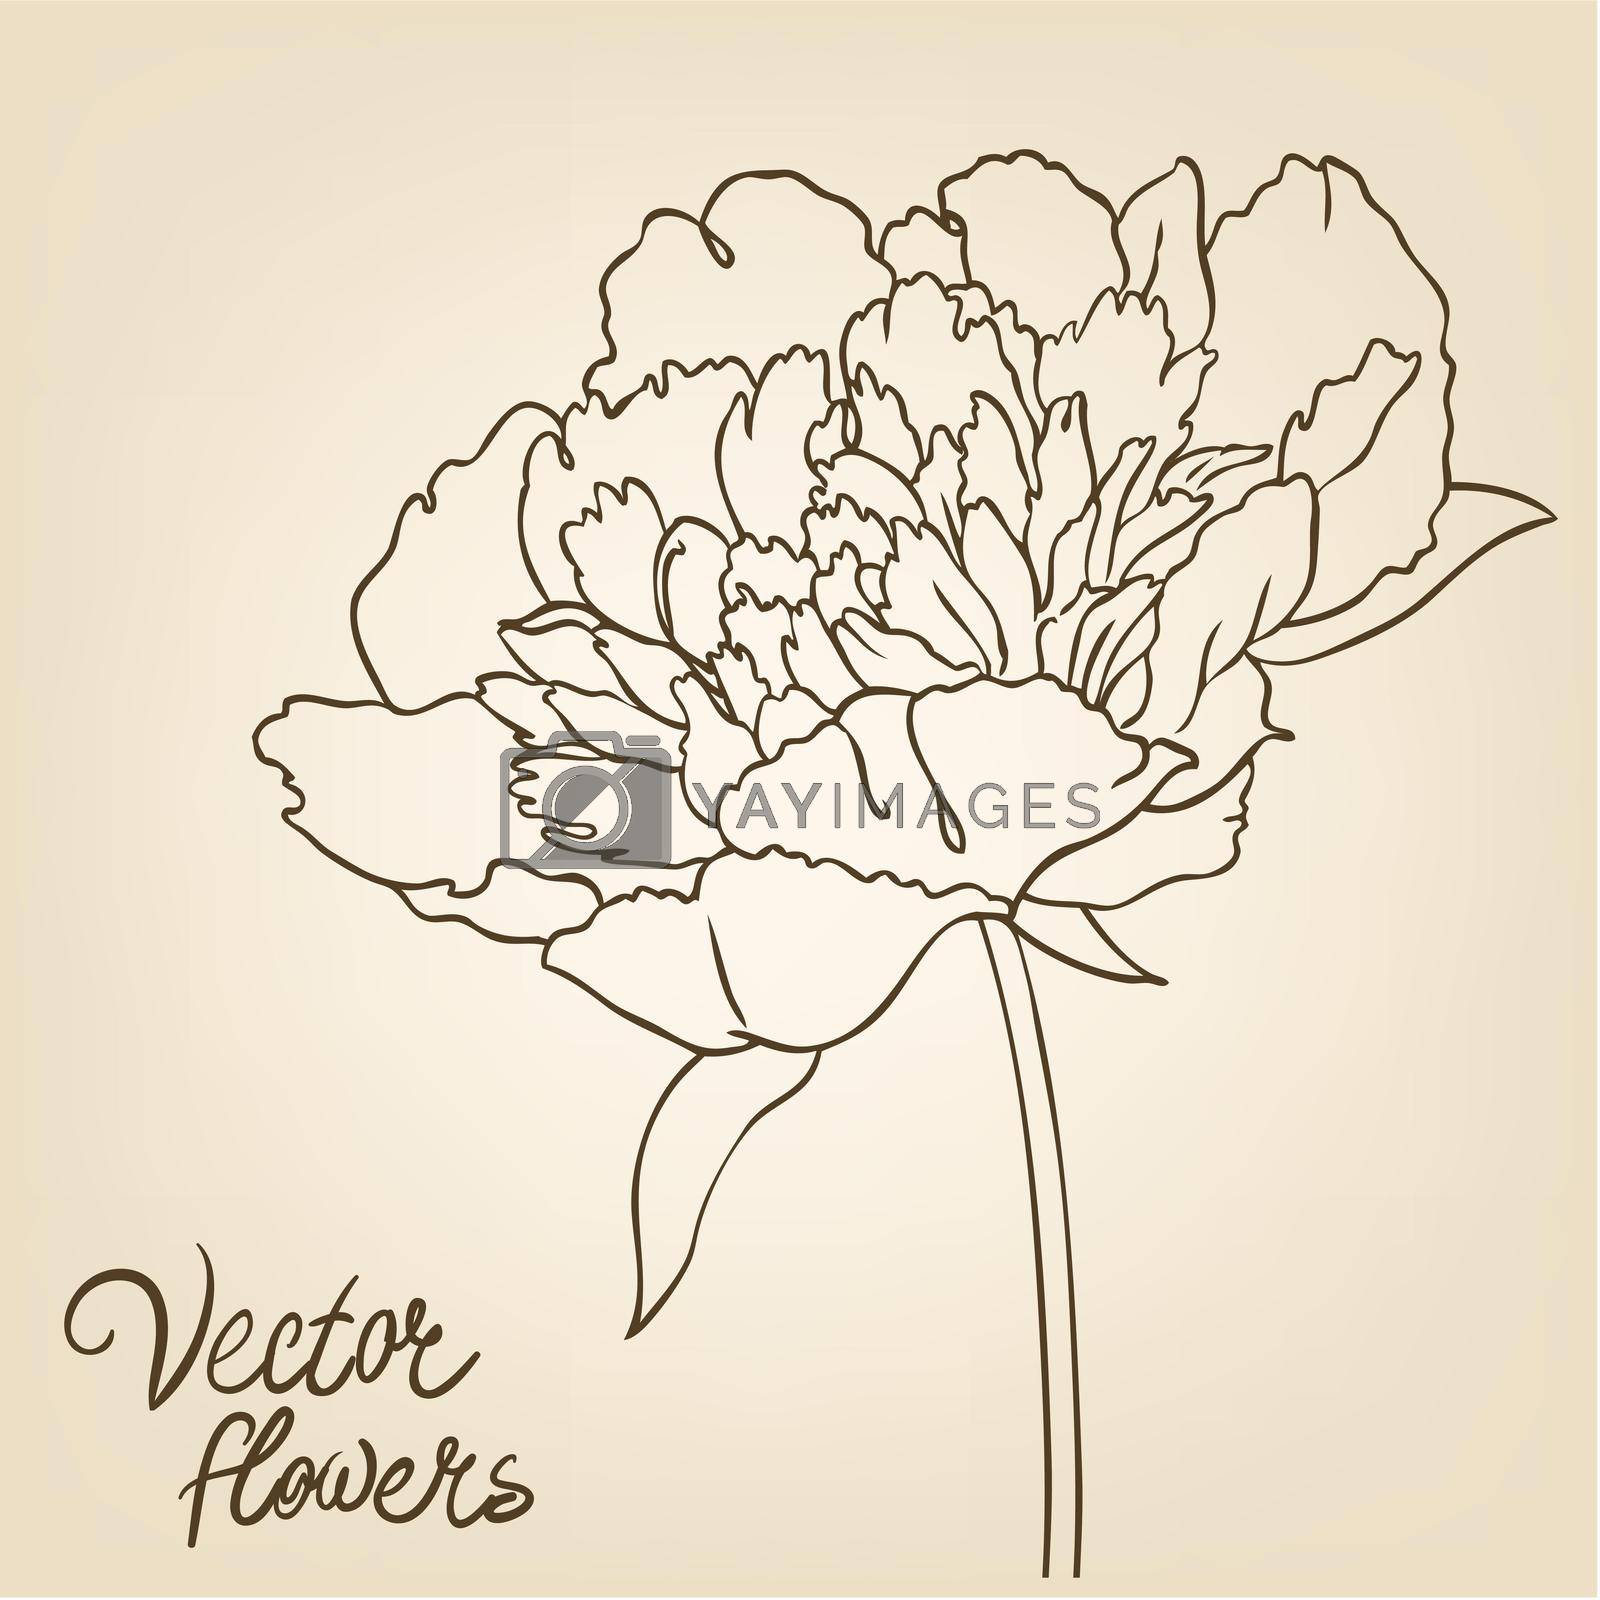 Royalty free image of Vintage hand-drawing background with flowers by varka